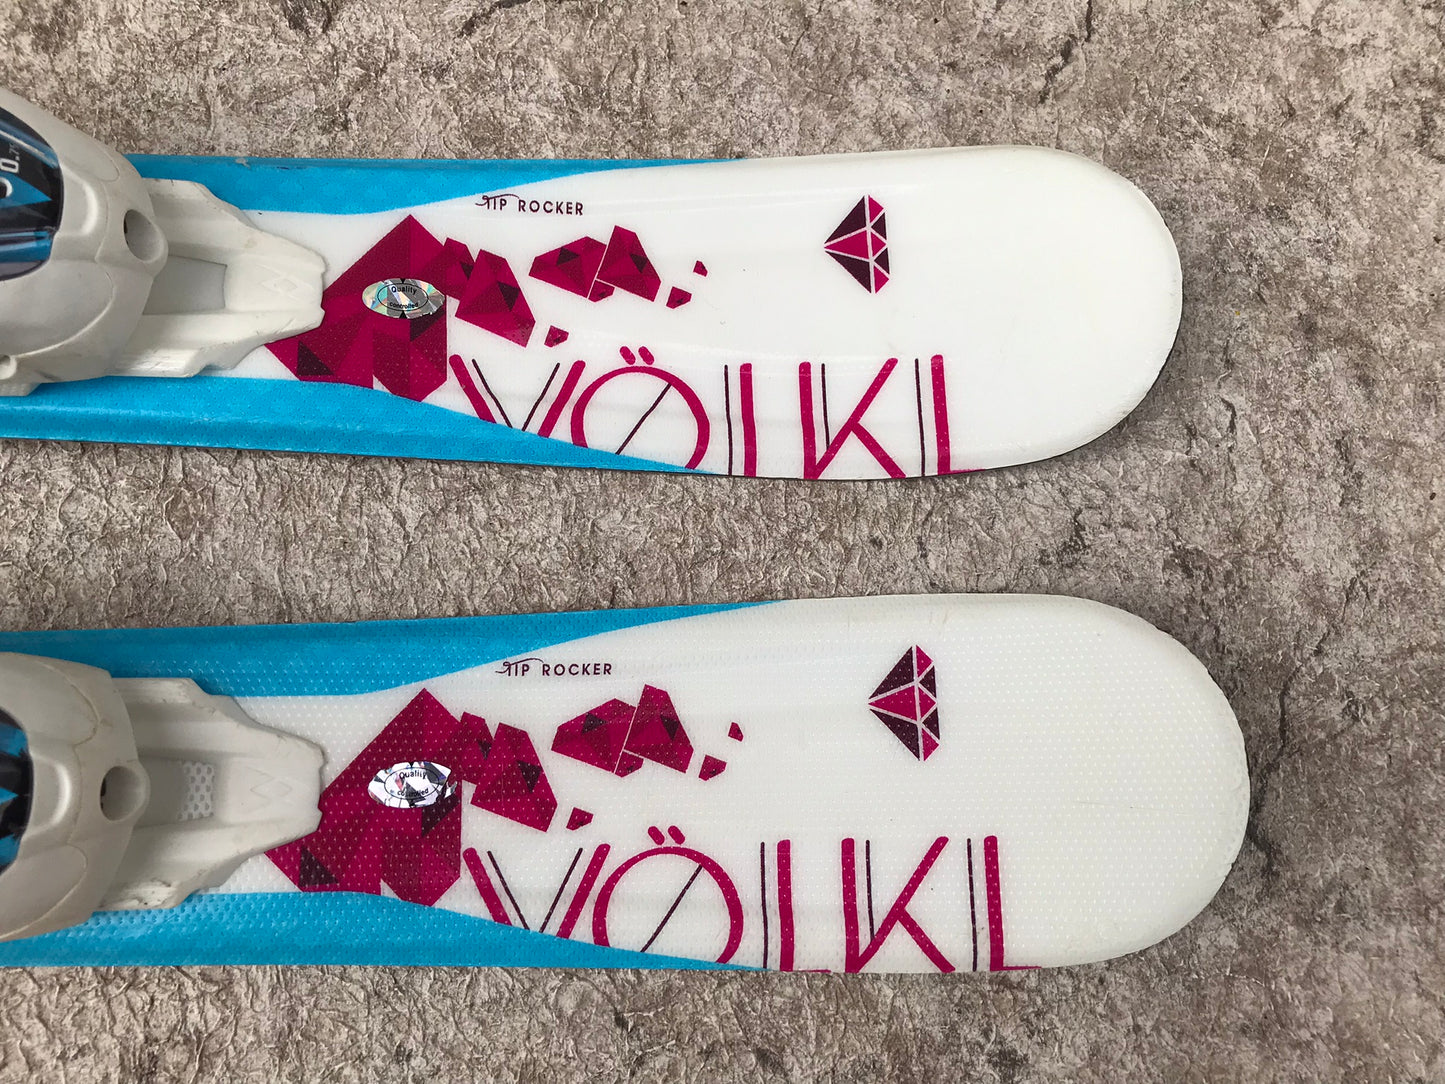 Ski 080 Volki Chica Toddler Blue Pink White Parabolic With Bindings Excellent